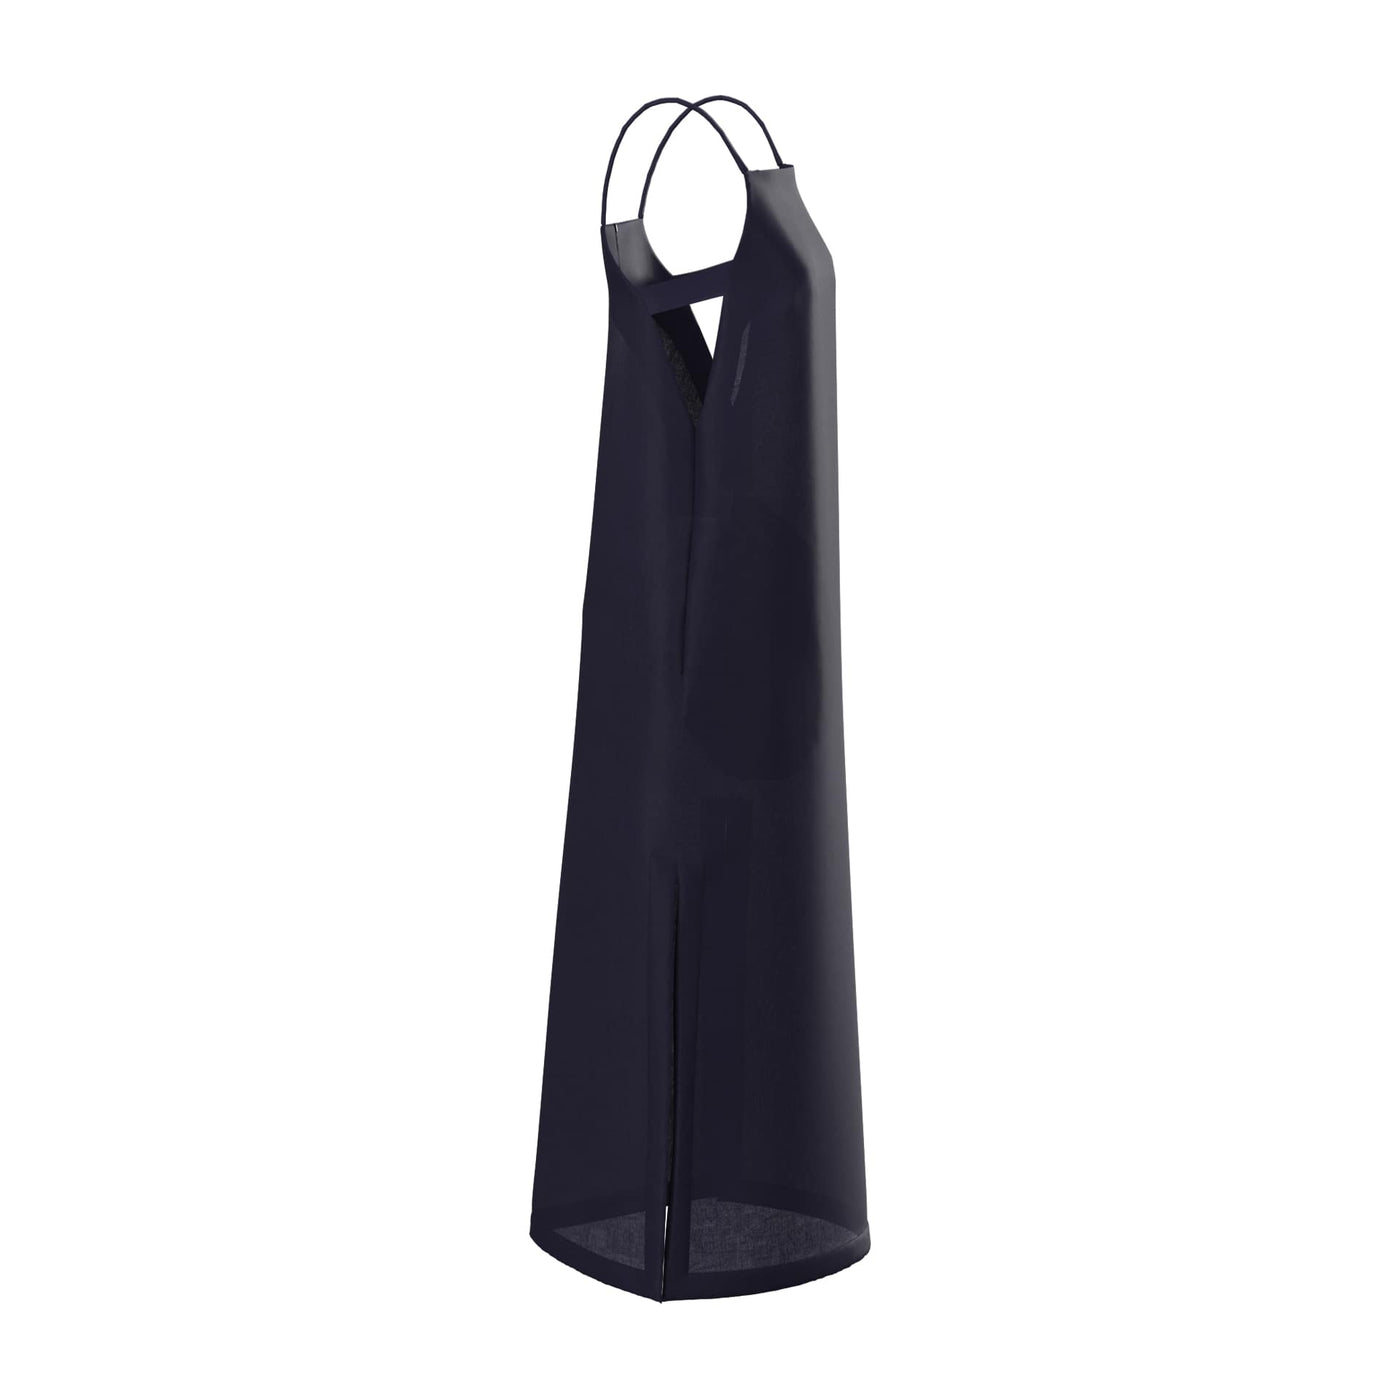 Lilly Pilly Collection 100% organic linen Kai slip dress in Navy as 3d model showing side view